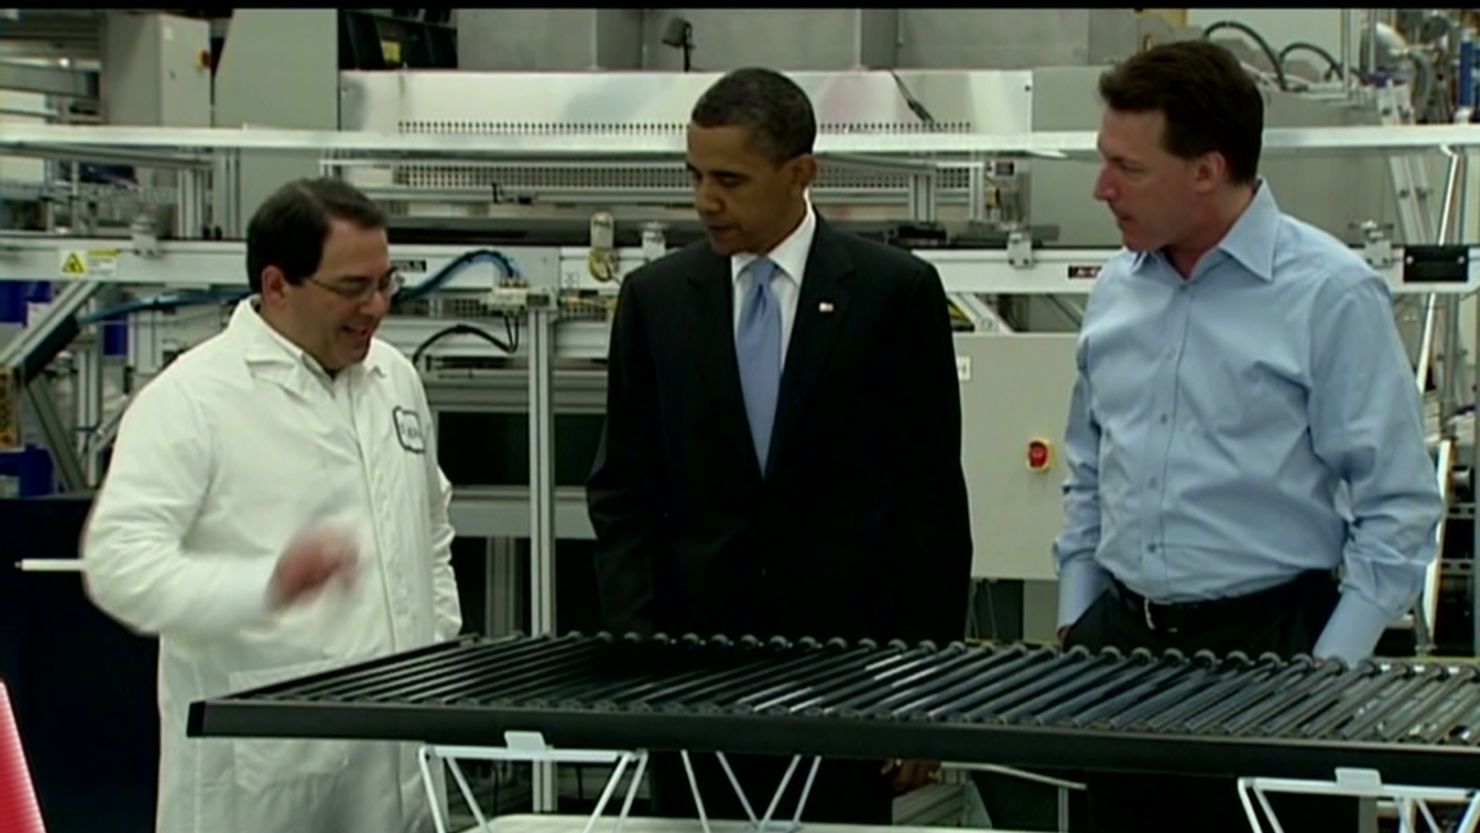 President Barack Obama had touted Solyndra in a widely publicized visit after the loan guarantee came through.